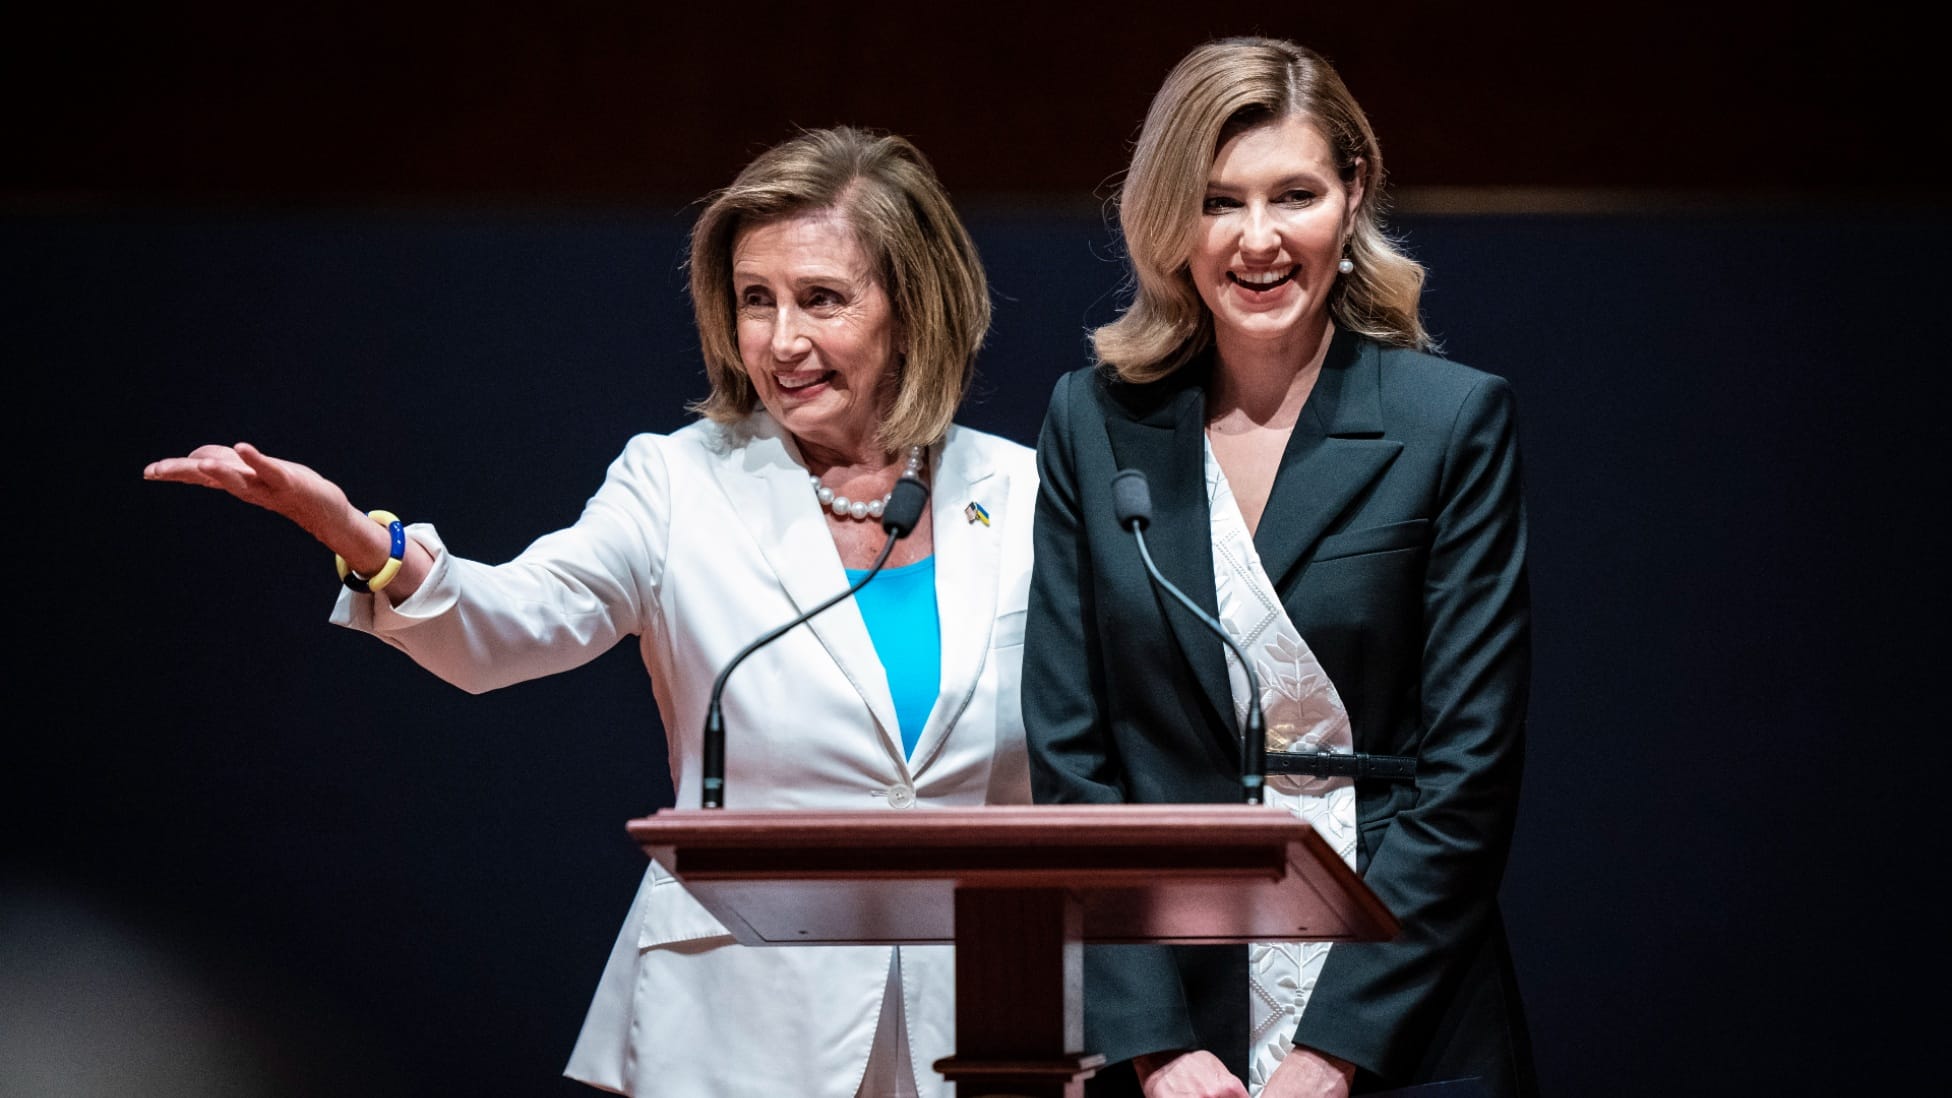 Olena Zelenska (right) with Nancy Pelosi, speaker of the House of Representatives, at the US Congress